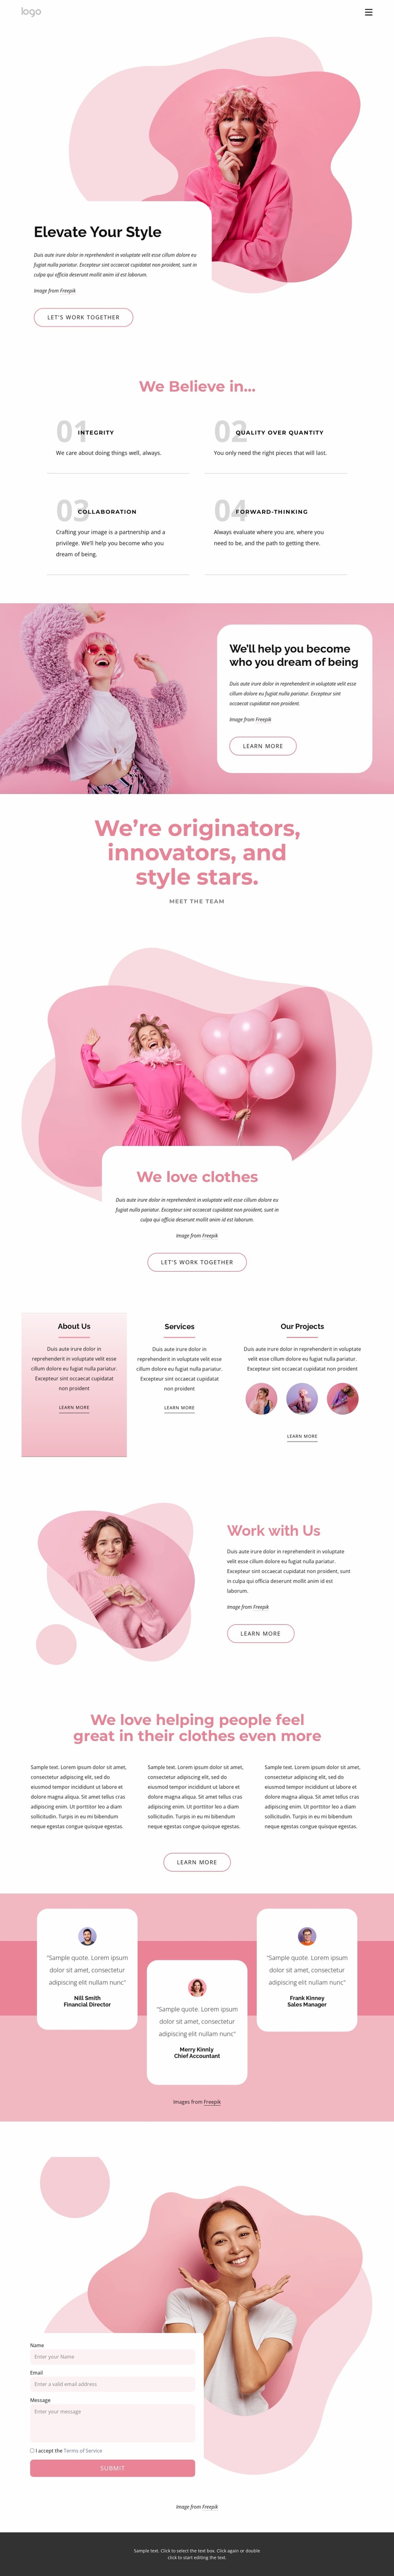 Elevate your style Website Template